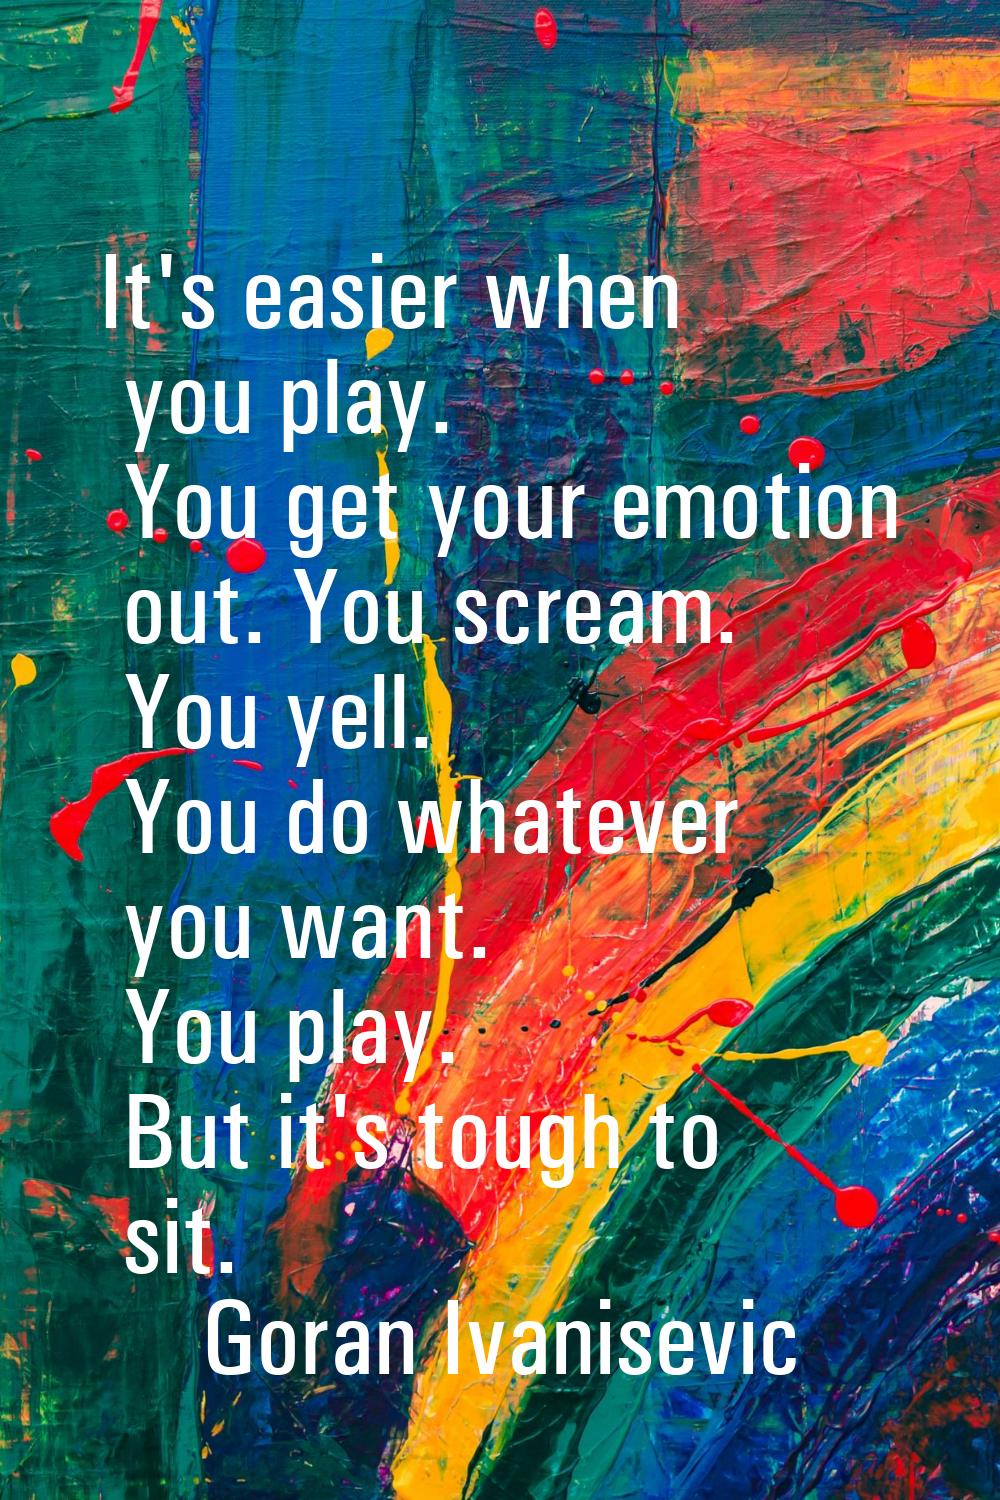 It's easier when you play. You get your emotion out. You scream. You yell. You do whatever you want